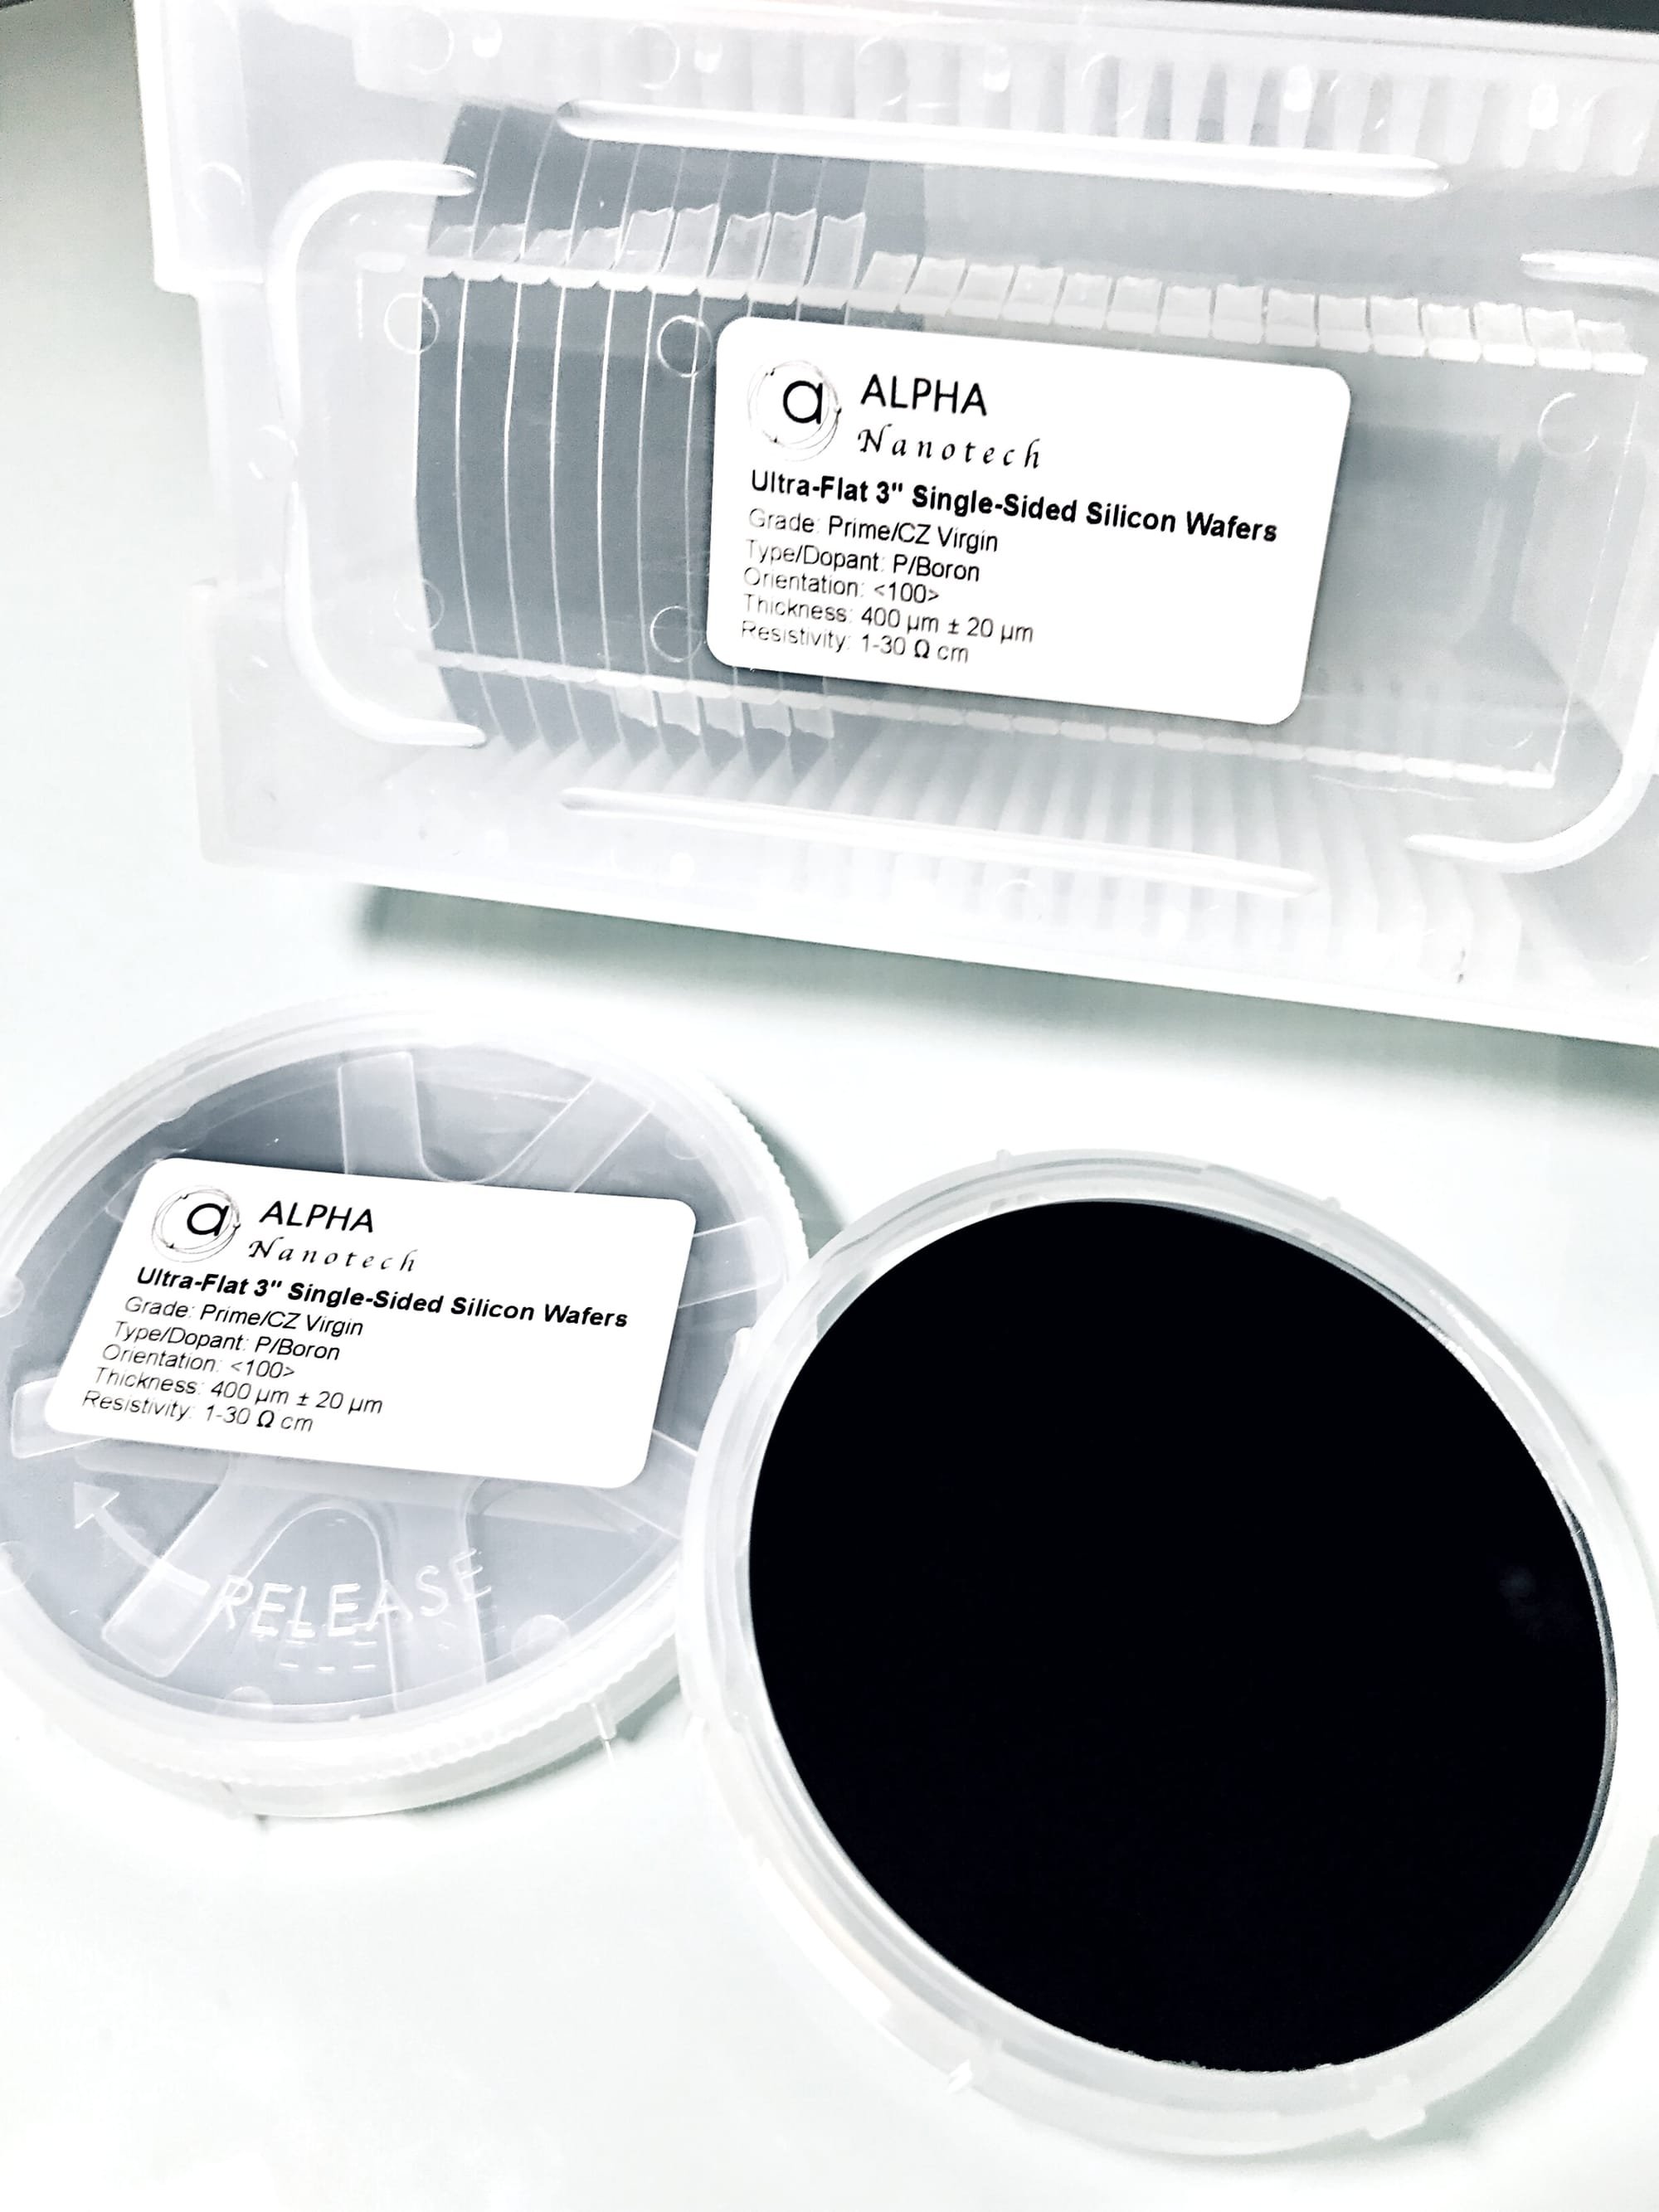 What are the uses of P-type Boron-doped 200nm SiO2 thermal oxide wafer?